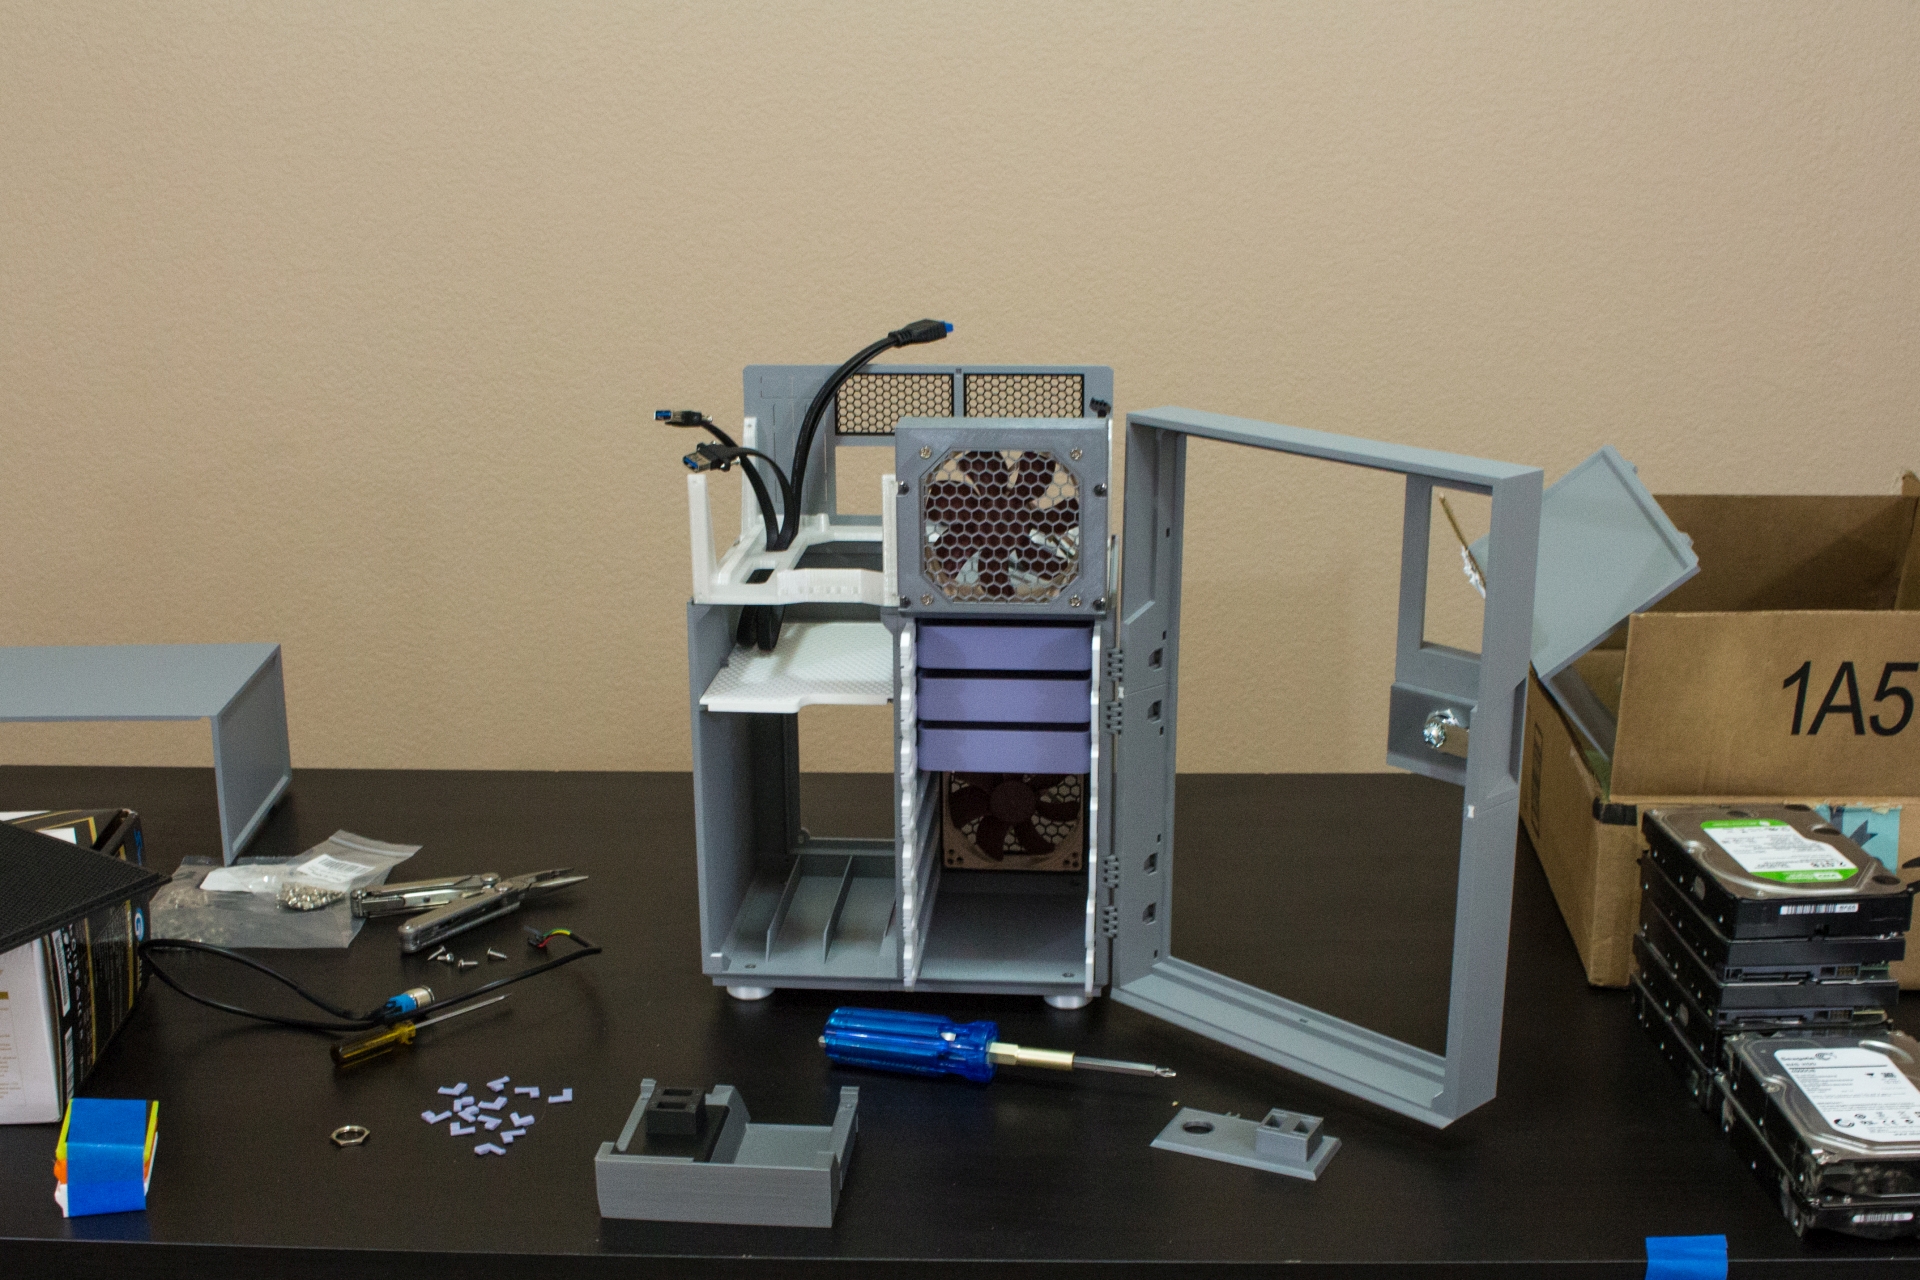 Looking for a project to pass the time? Try 3D printing a NAS box